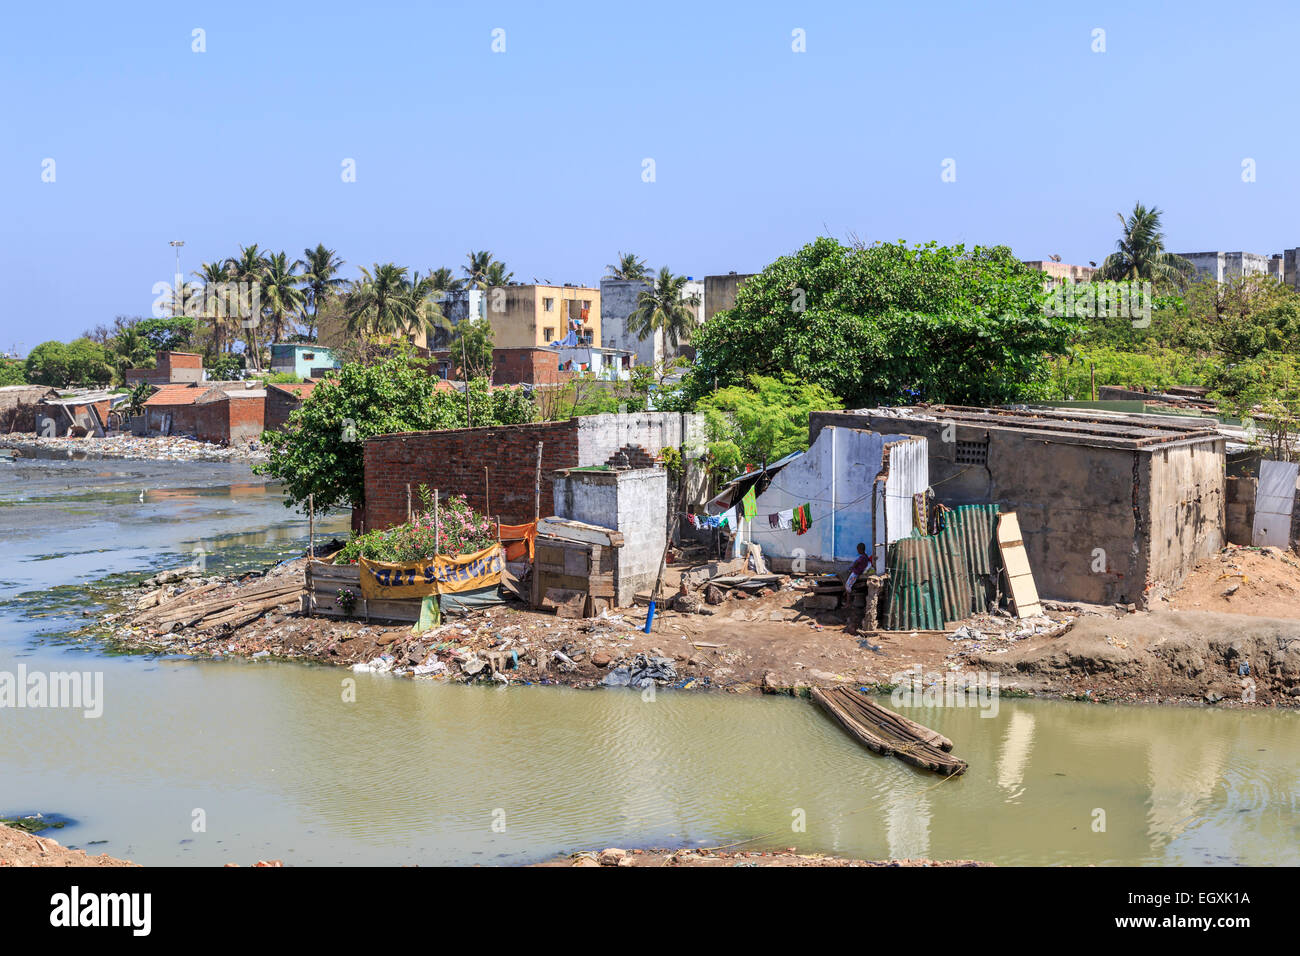 Third world poverty lifestyle: Poor slums on the banks of the polluted Adyar River estuary with filthy water, in Chennai, Tamil Nadu, southern India Stock Photo